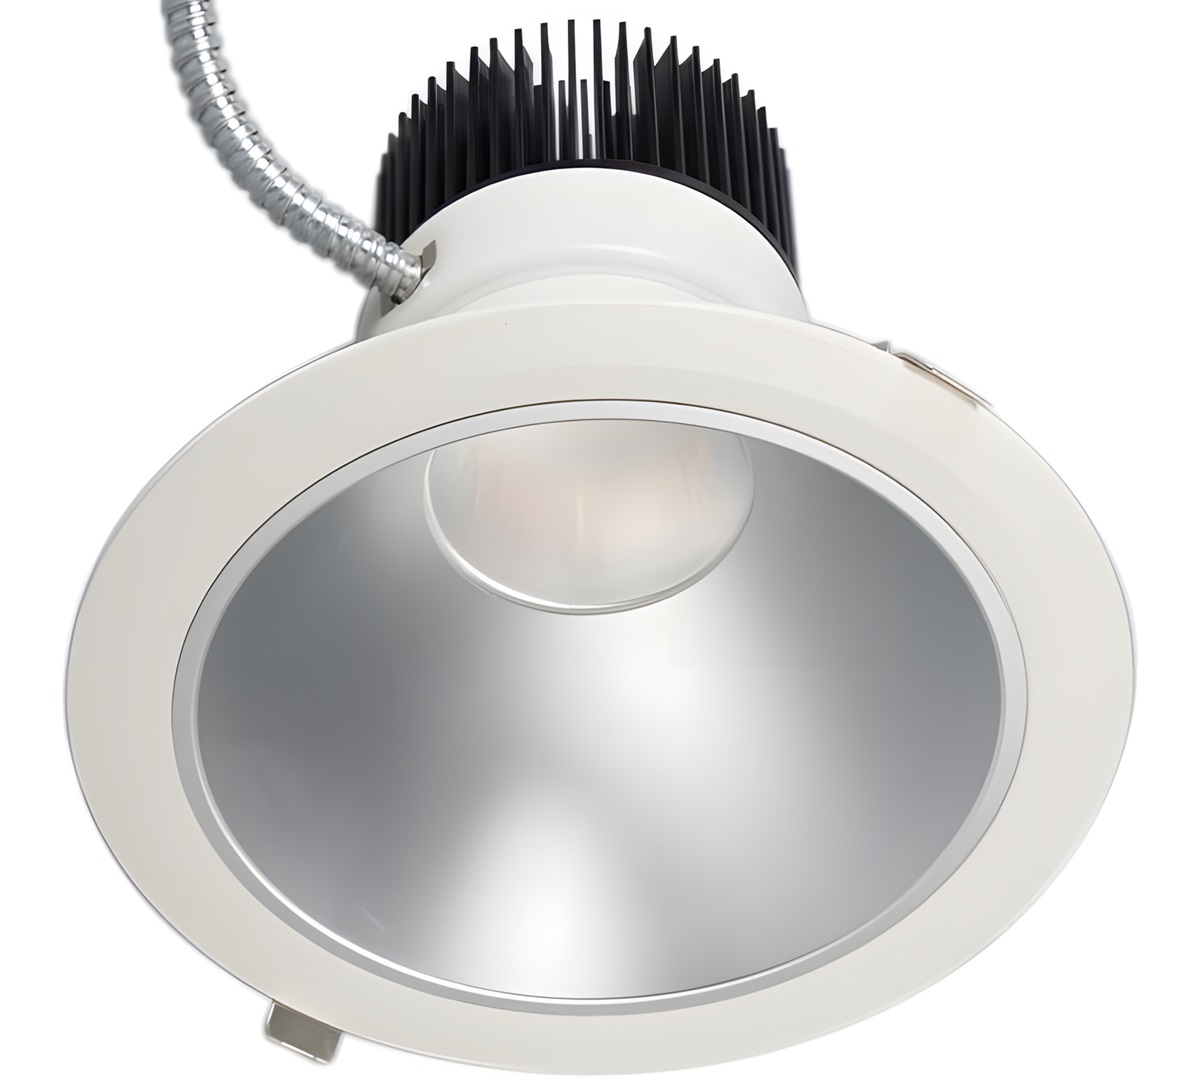 Lanbot Introduces the 8-inch Architectural Recessed LED Downlight